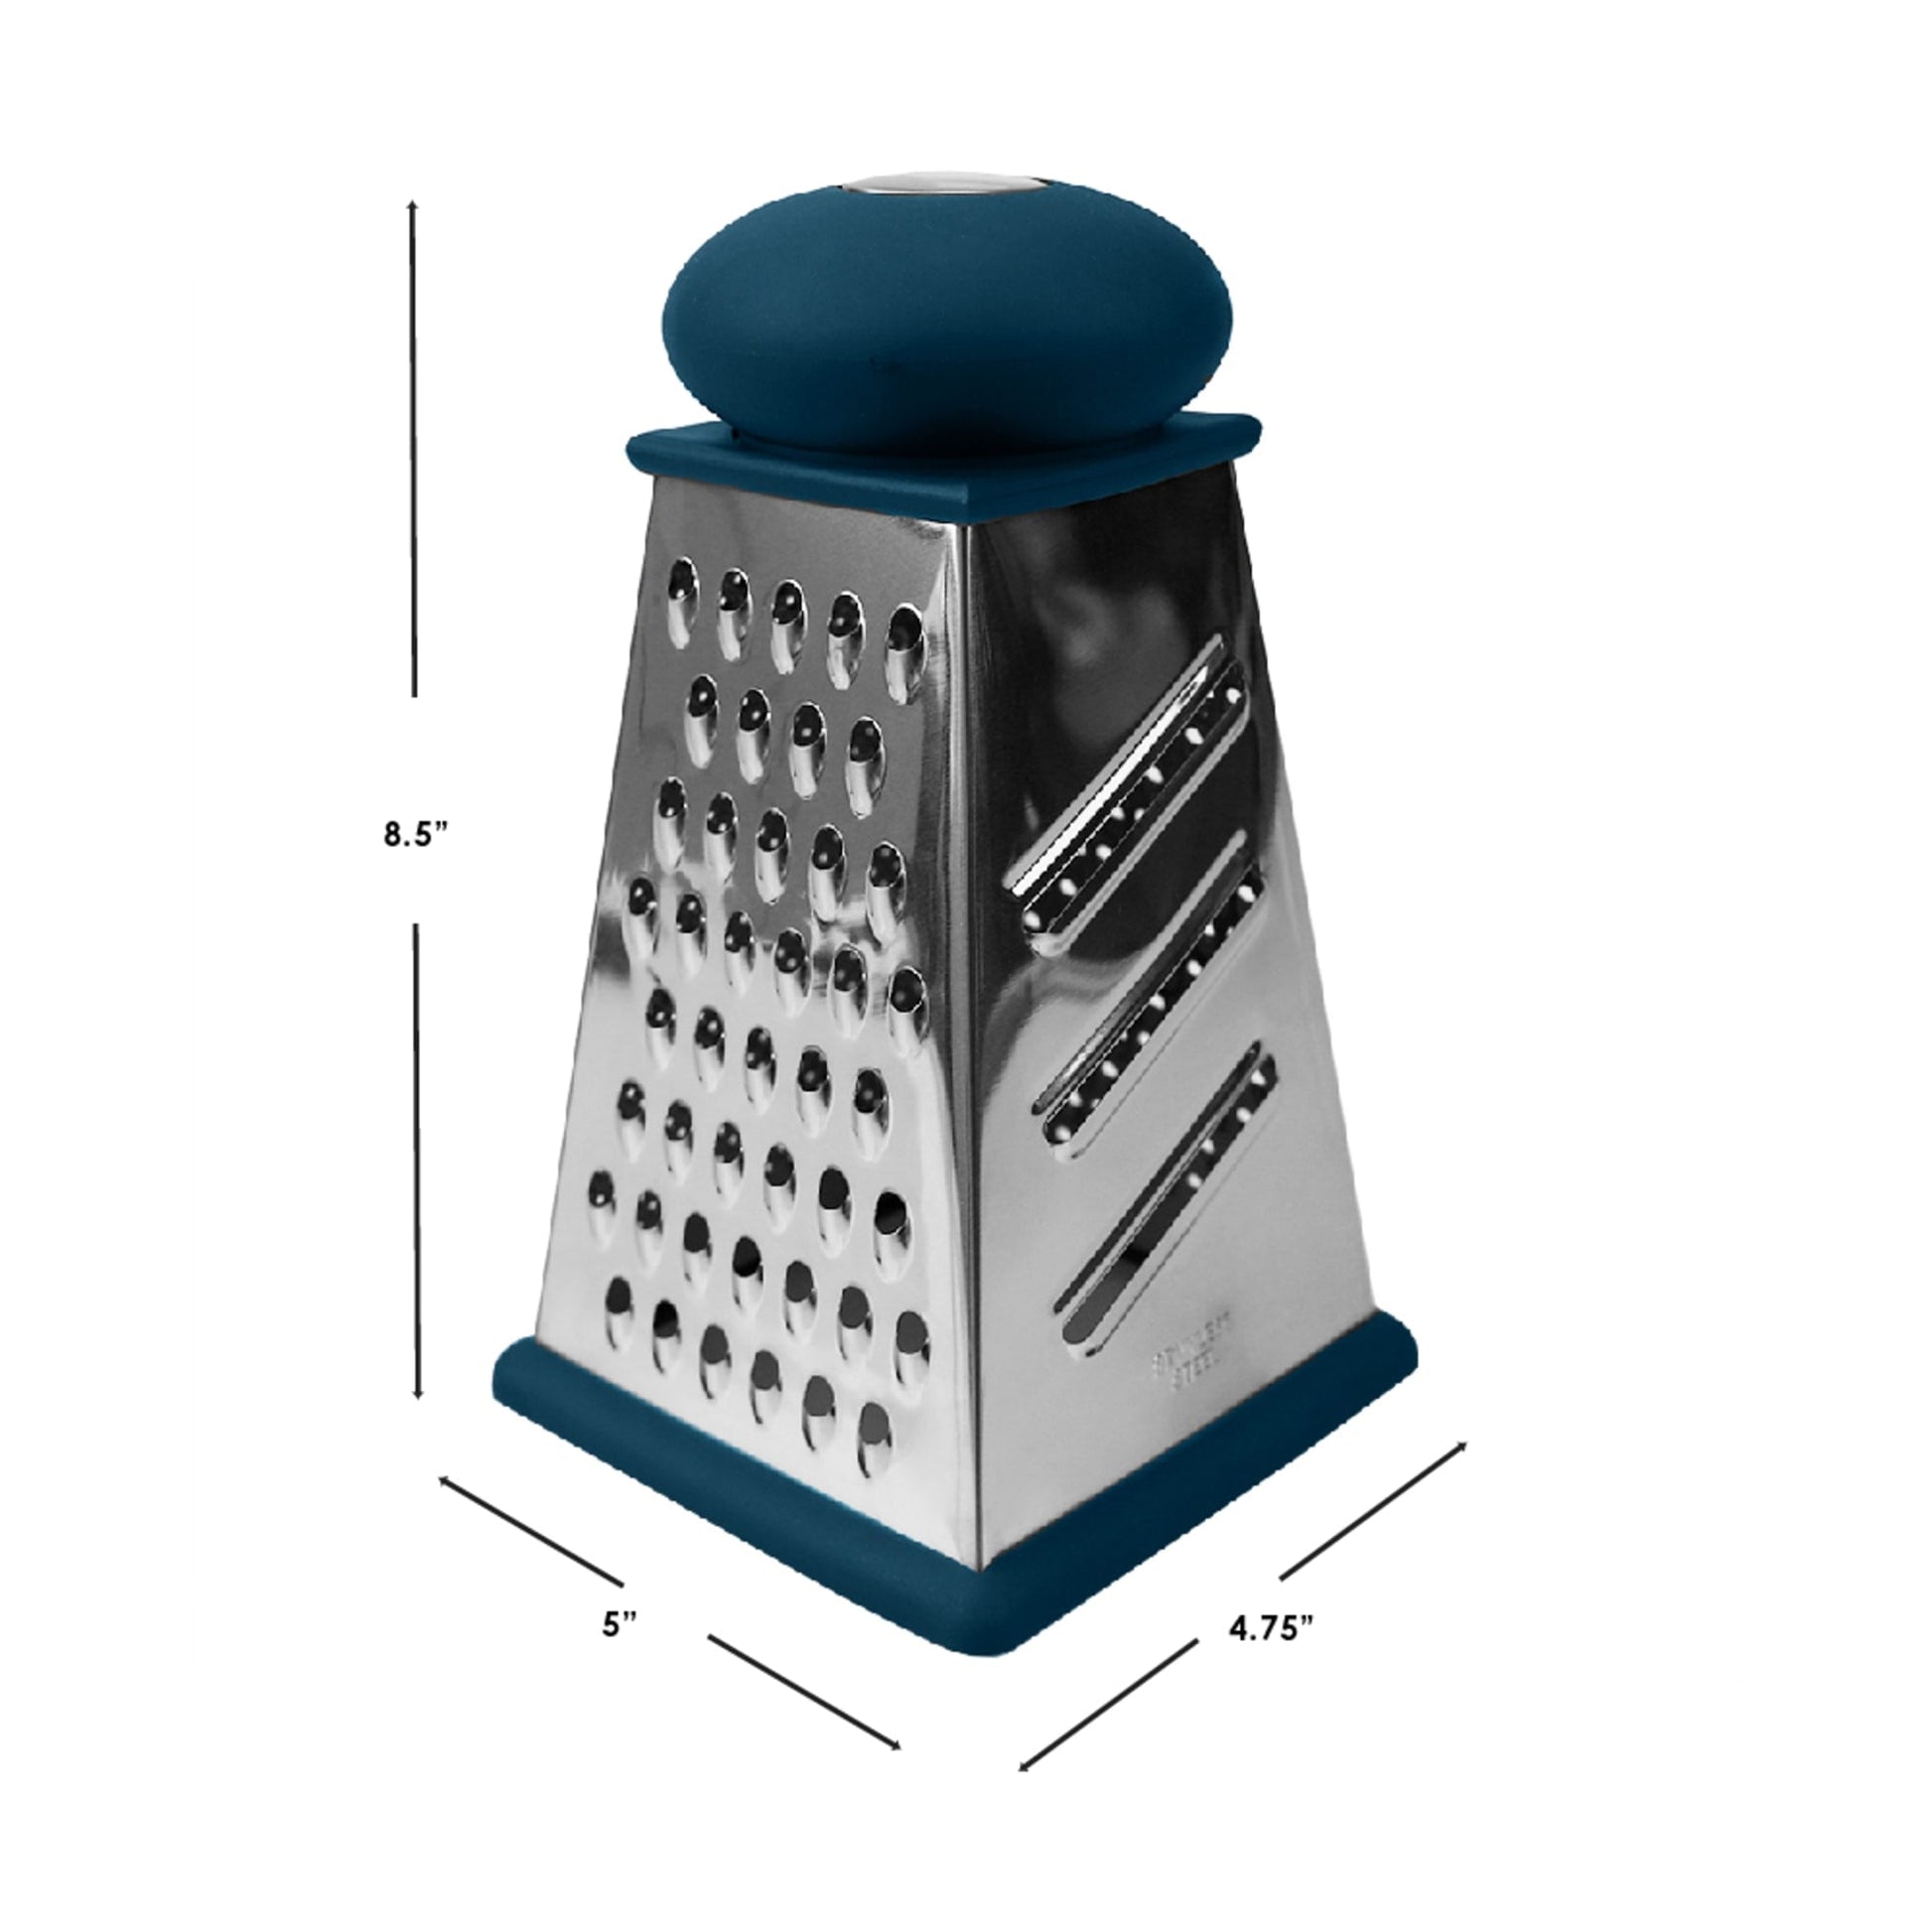 Four-side Box Grater Vegetable Slicer Tower-shaped Potato Cheese